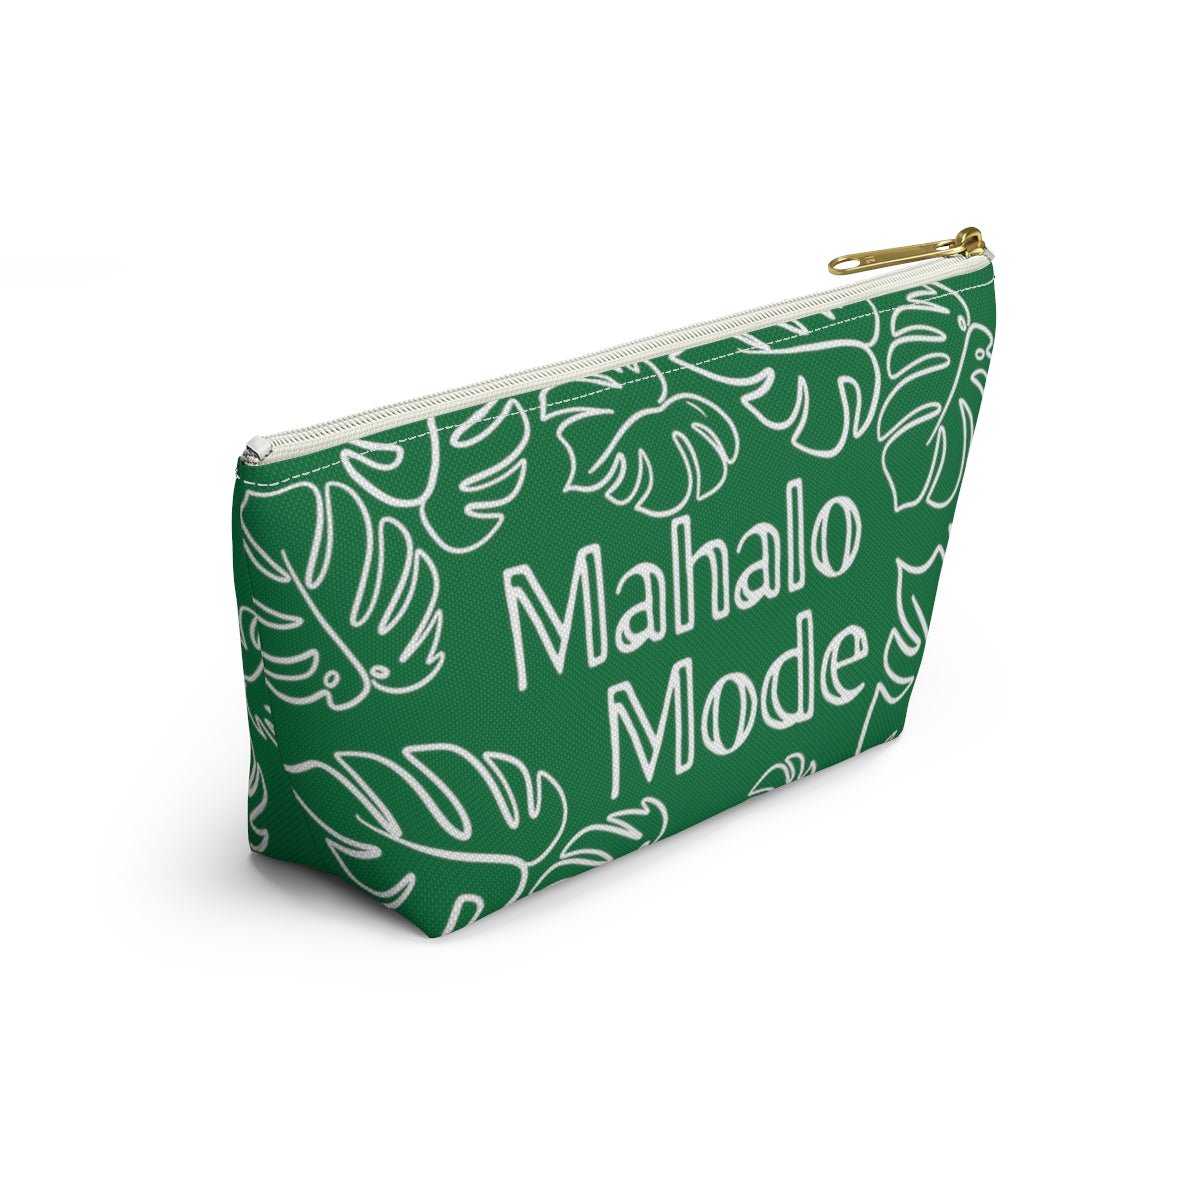 Mahalo Mode Zip Pouch with T-Bottom Global Village Kailua Boutique